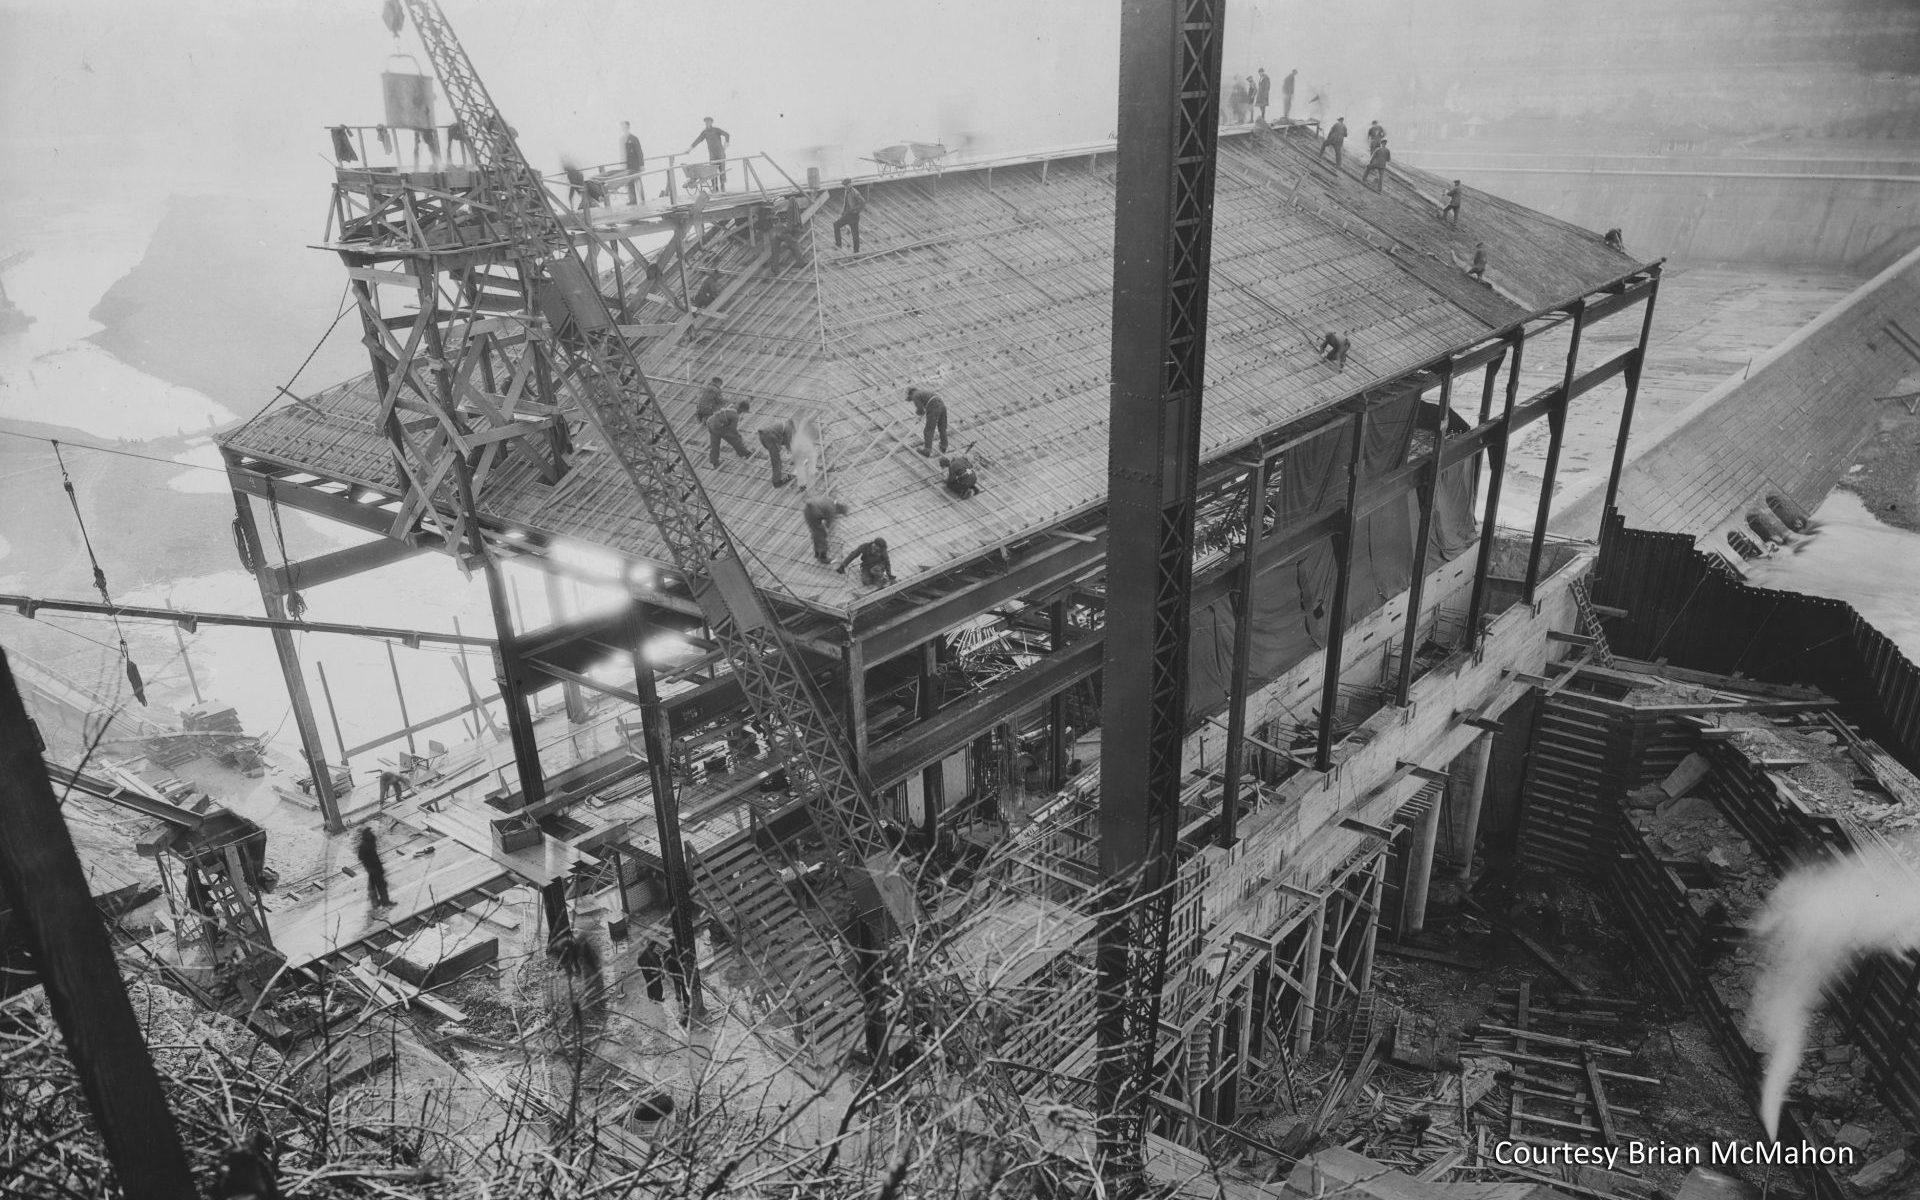 Construction of the hydroelectric plant was well underway in this 1923 photo. The plant began generating electricity in 1924. Courtesy Brian McMahon